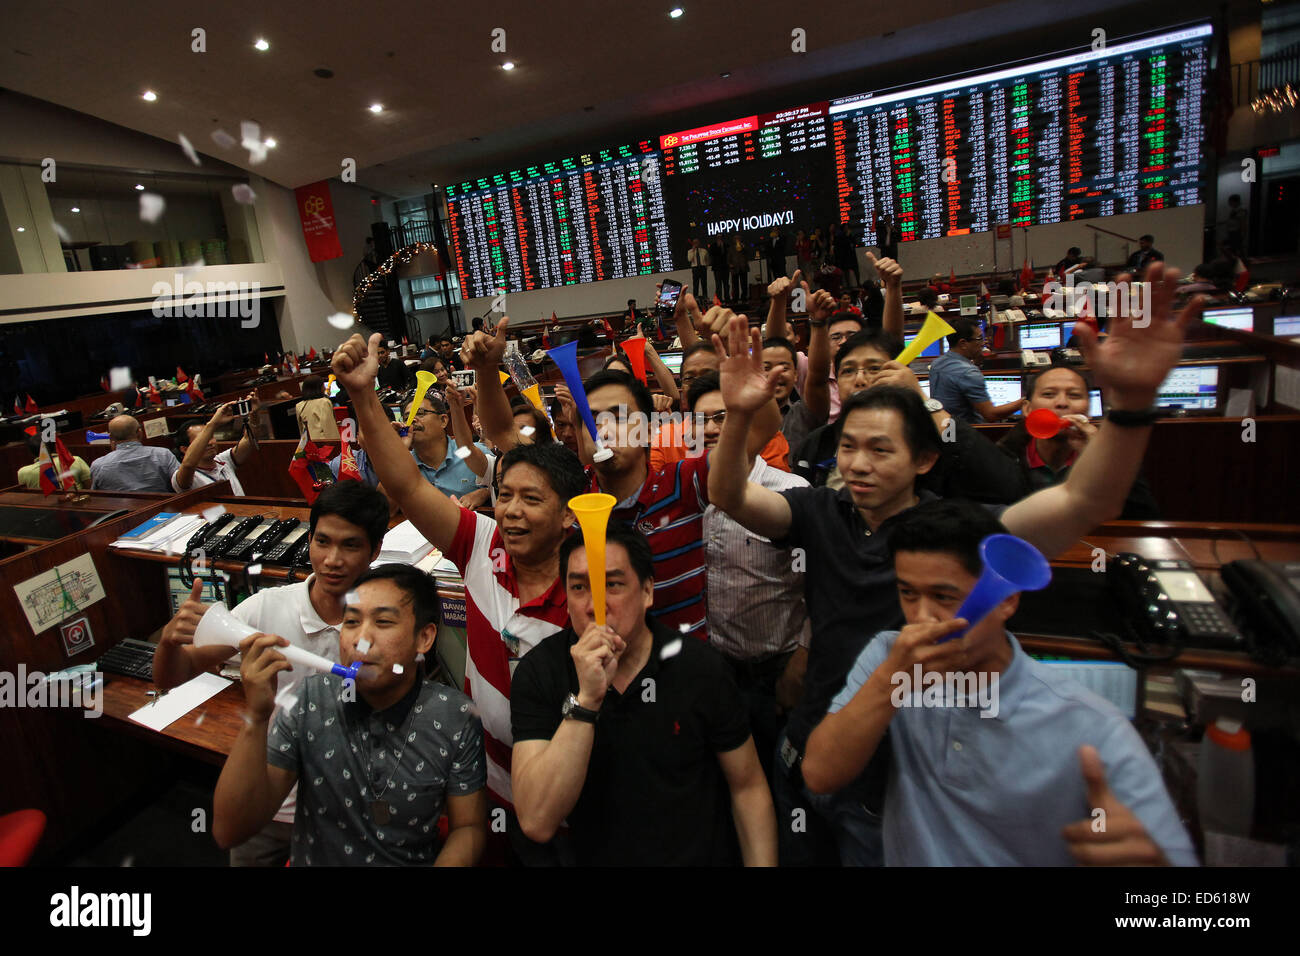 (141229) -- MAKATI CITY, Dec. 29, 2014 (Xinhua) -- Traders blow toy trumpets during the last trading day of 2014 at the Philippine Stock Exchange in Makati City, the Philippines, Dec. 29, 2014. Philippine stock index rose 0.62 percent on its last trading day for the year. It ended the year at a two-week high of 7,230.57, rising 22.8 percent in 2014, among the region's outperformers.(Xinhua/Rouelle Umali)(zhf) Stock Photo